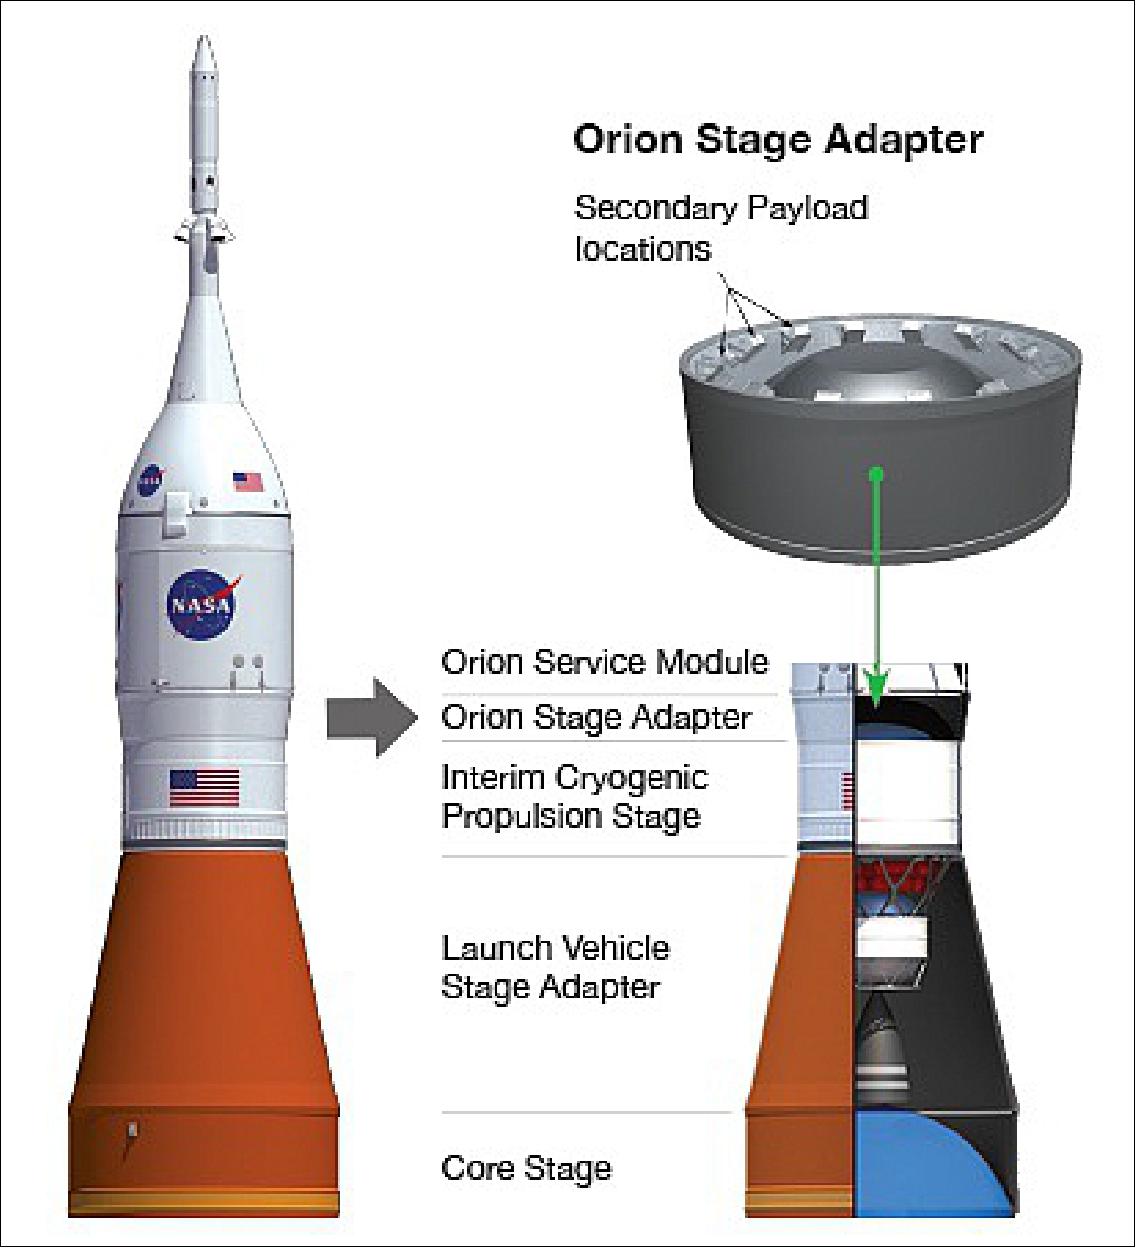 Figure 12: The CubeSats will be deployed from the Orion Stage Adapter (image credit: NASA, Ref. 10)